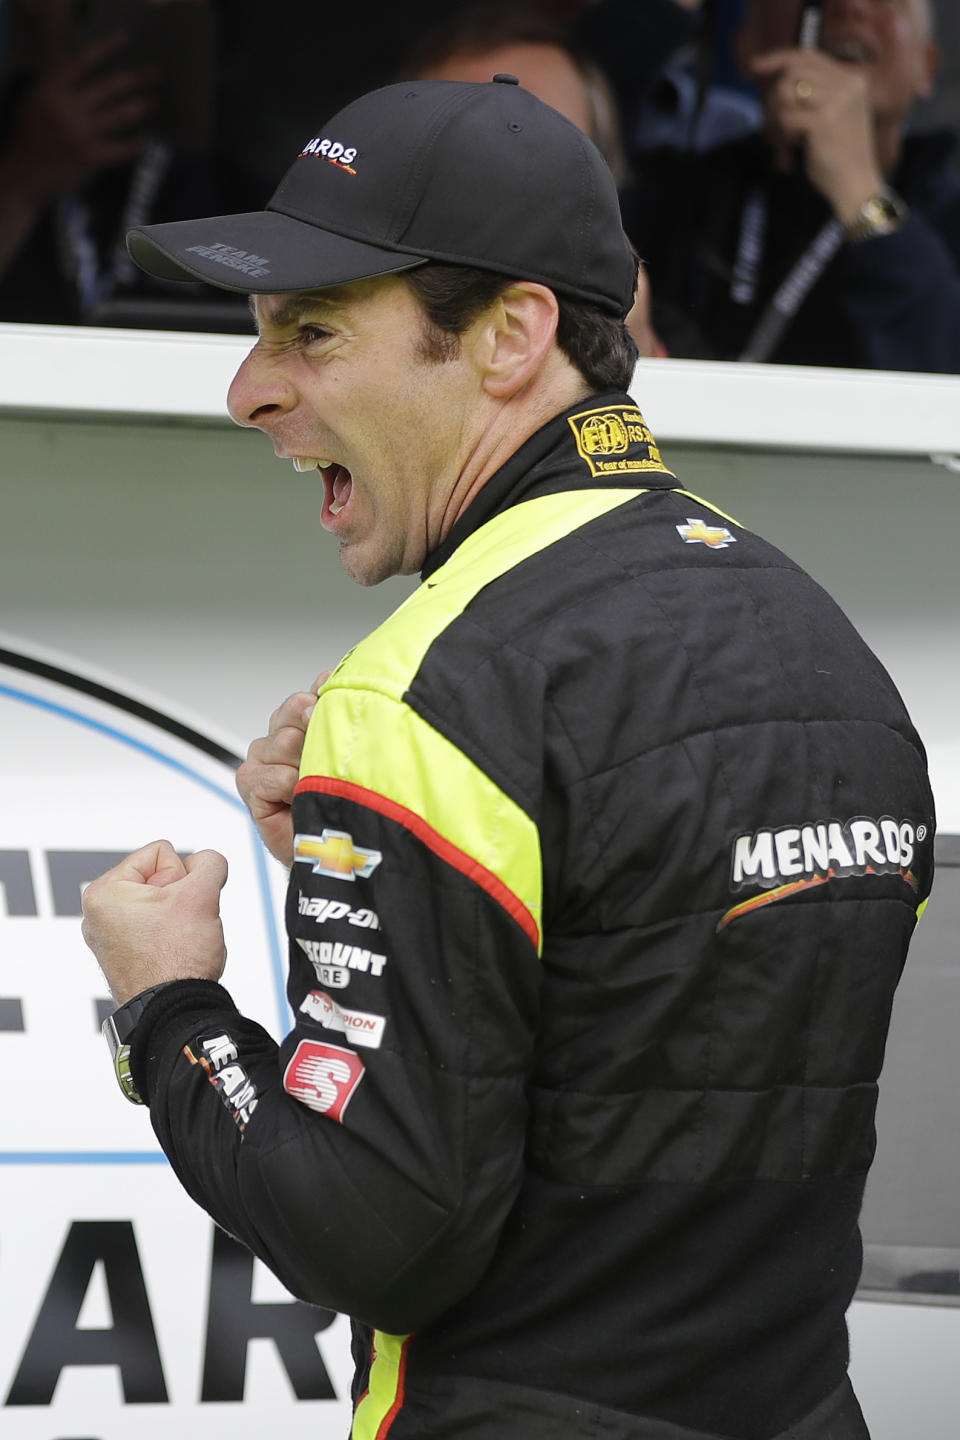 Simon Pagenaud, of France, celebrates after winning the pole for the Indianapolis 500 IndyCar auto race at Indianapolis Motor Speedway, Sunday, May 19, 2019 in Indianapolis. (AP Photo/Darron Cummings)